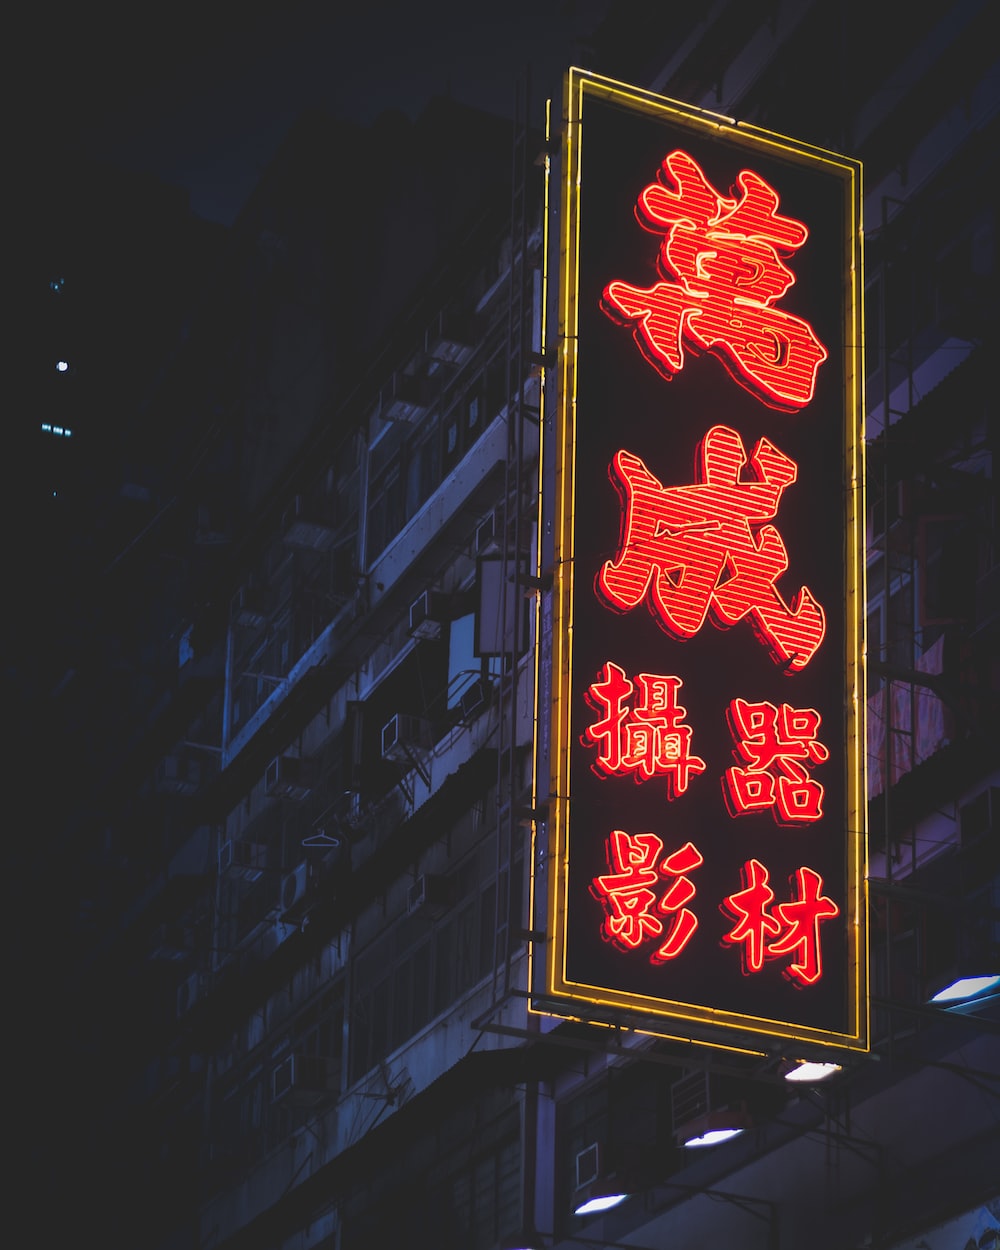 Hong Kong Neon Picture. Download Free Image